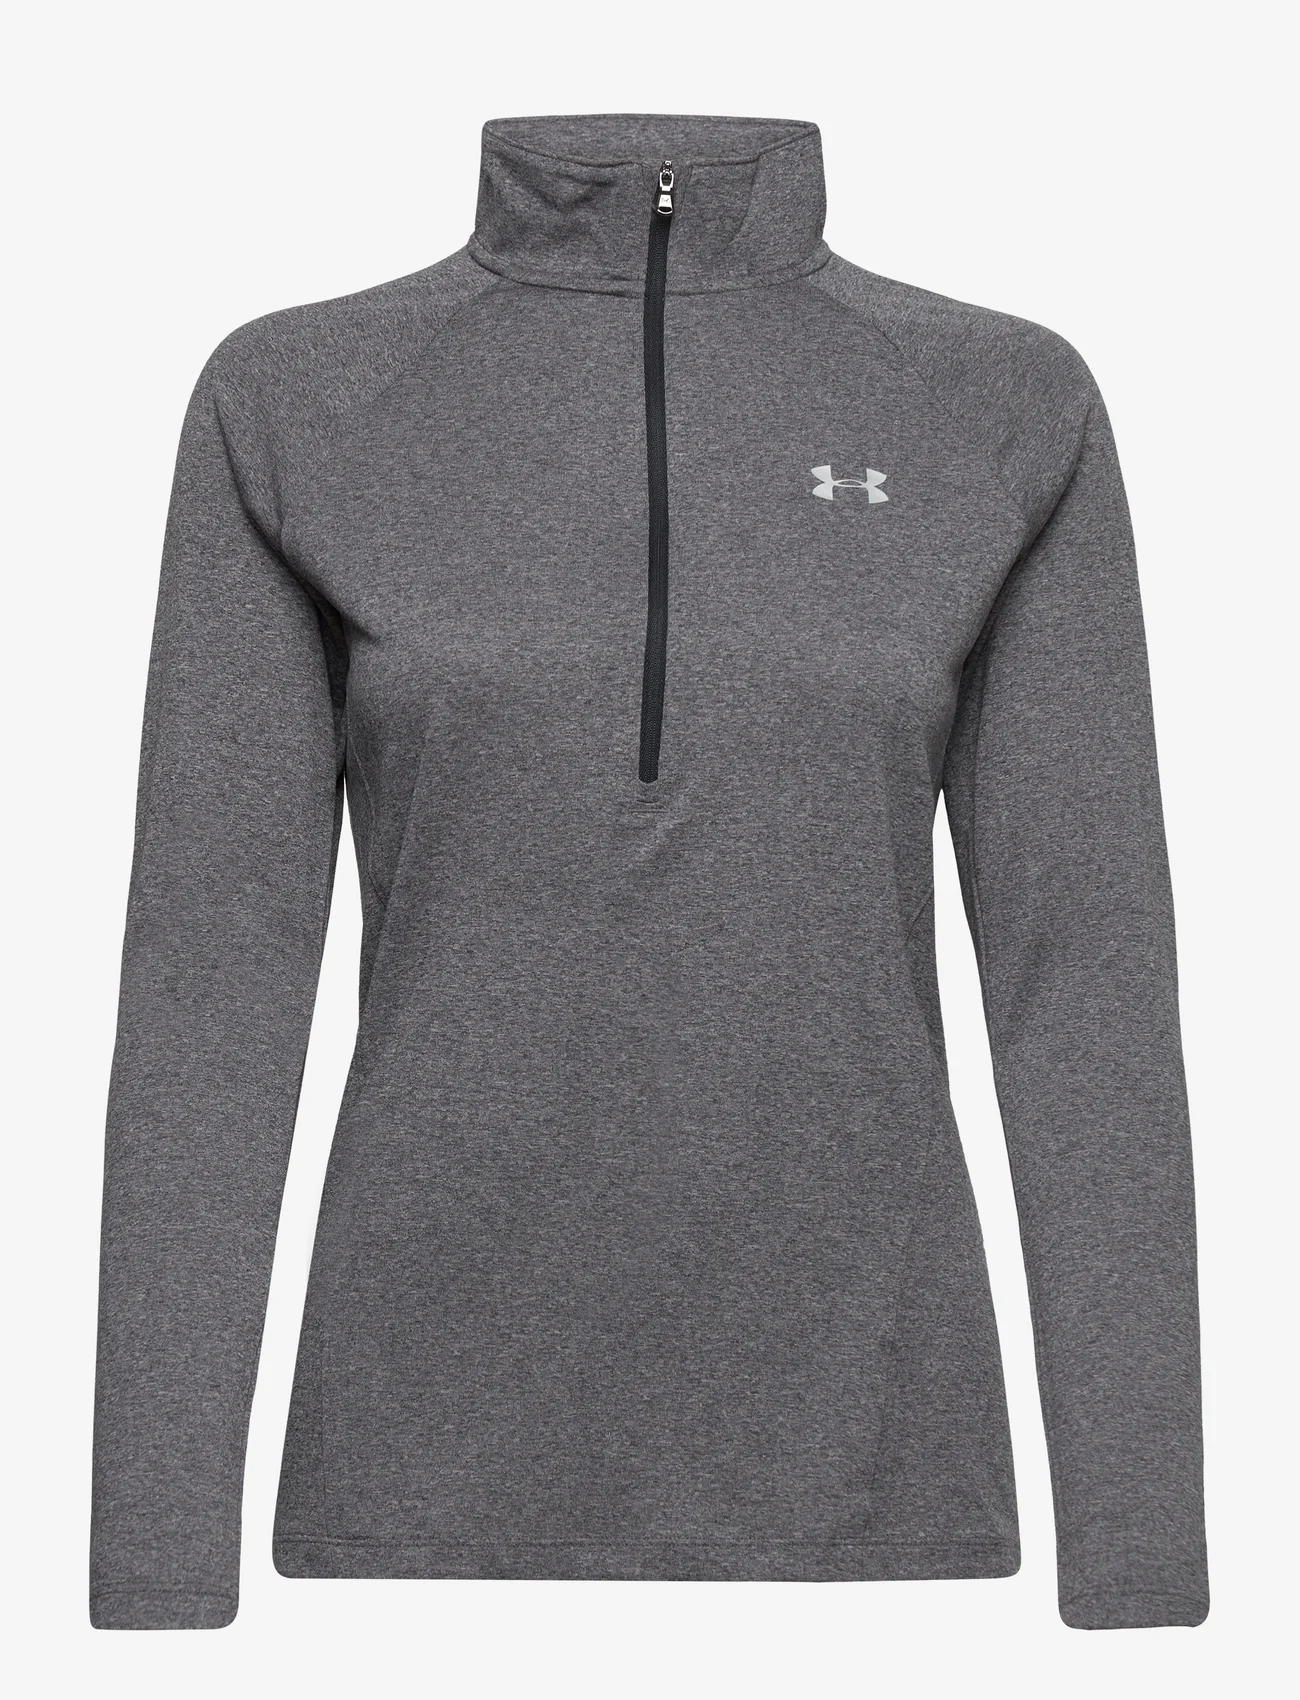 Under Armour - Tech 1/2 Zip - Solid - carbon heather - 0